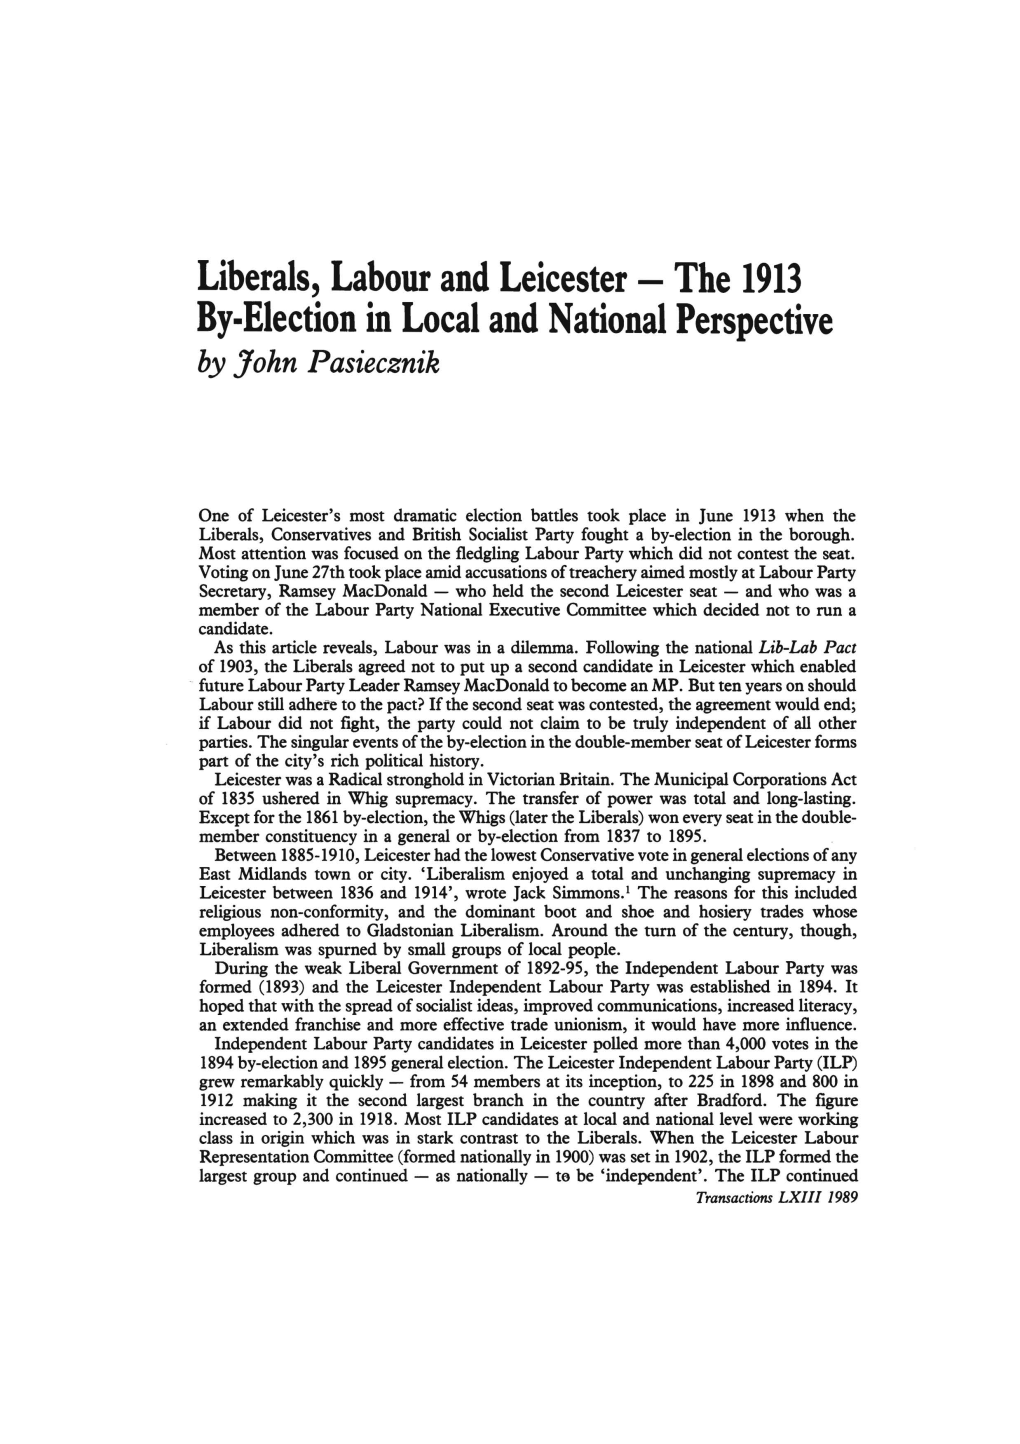 Liberals, Labour and Leicester - the 1913 By-Election in Local and National Perspective by John Pasiecznik